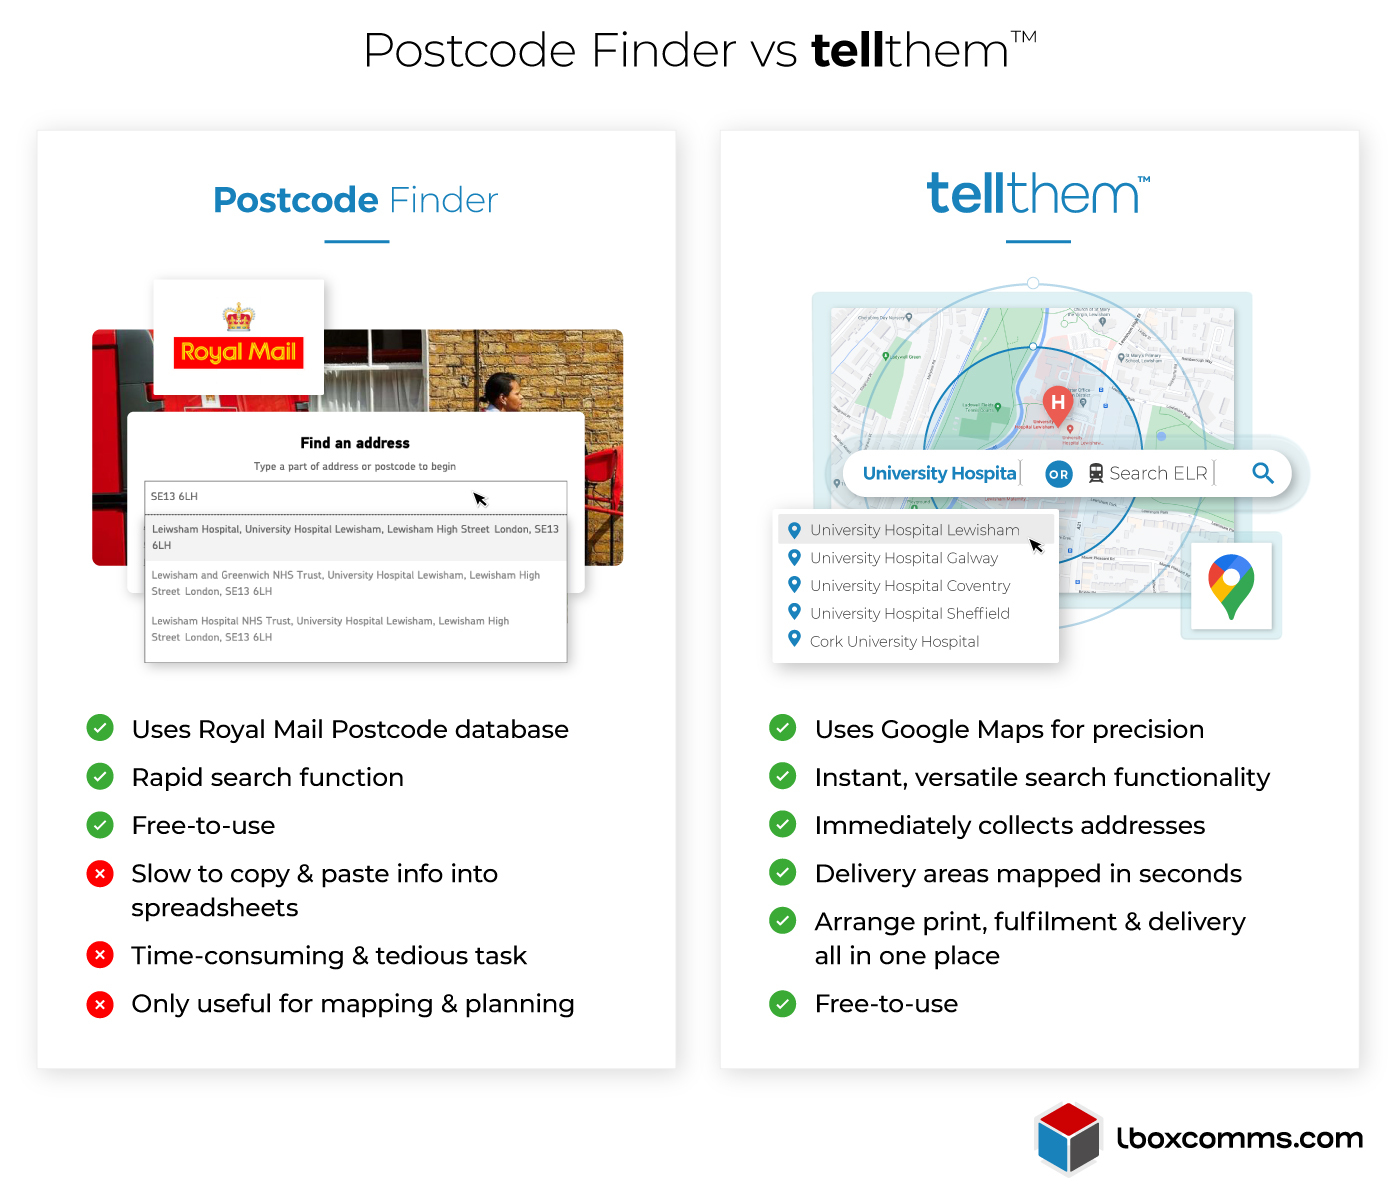 Postcode targeting - comparing tellthem TDMP to Postcode Finder Pros and Cons - Infographic